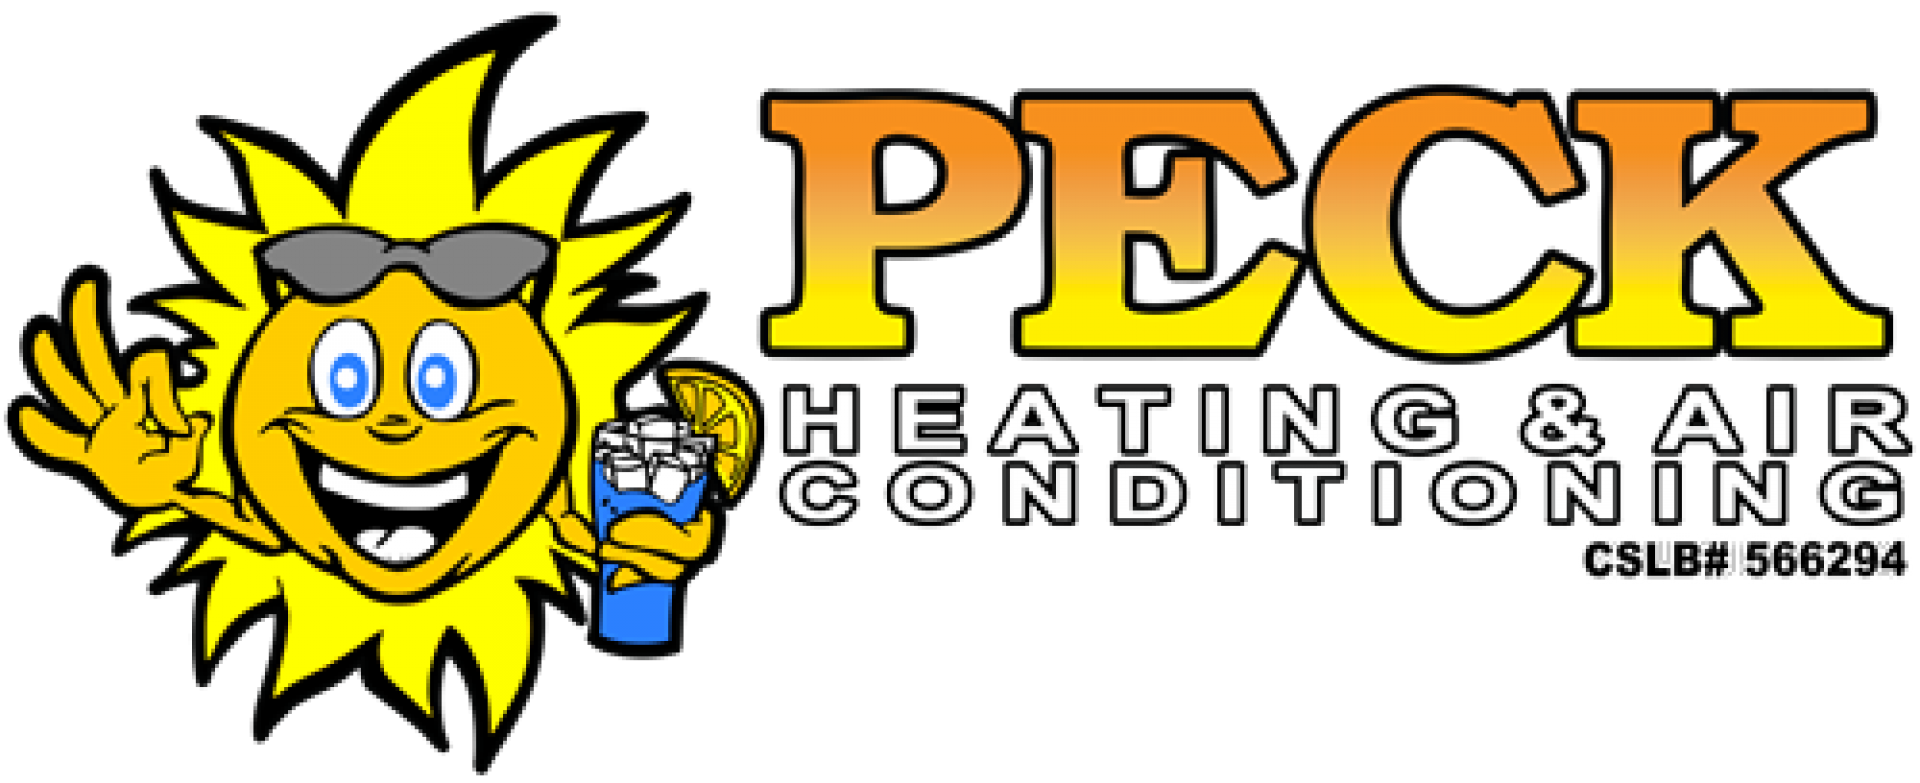 Peck Heating and Air company logo